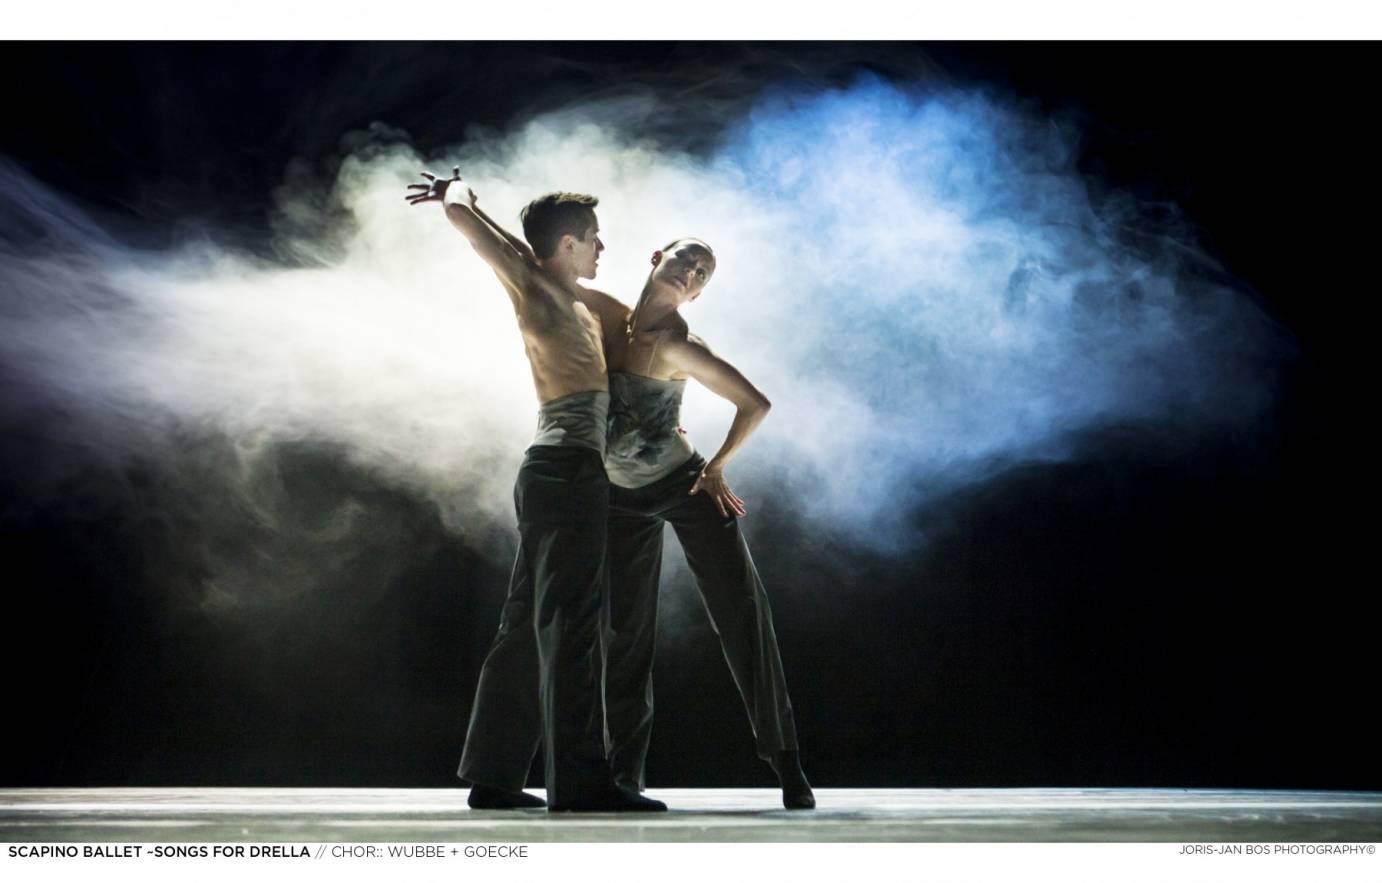 Two Scapino Ballet Rotterdam Dancers performing in midst of a cloud of fog